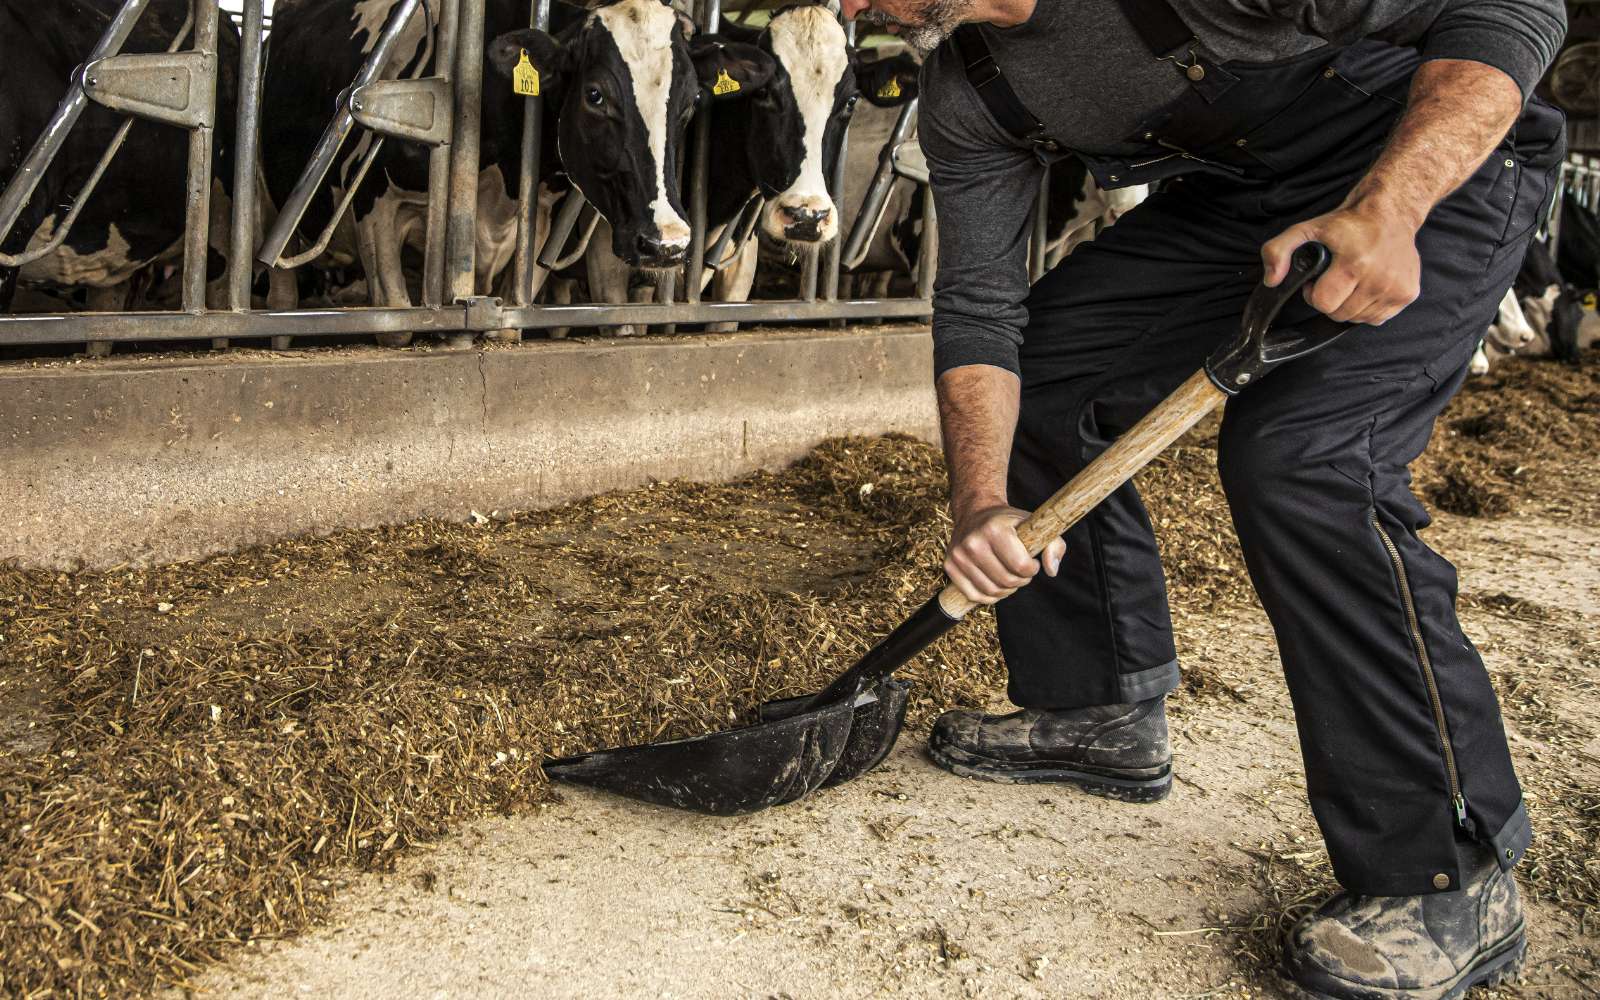 A man shovels feed inside a barn with cows